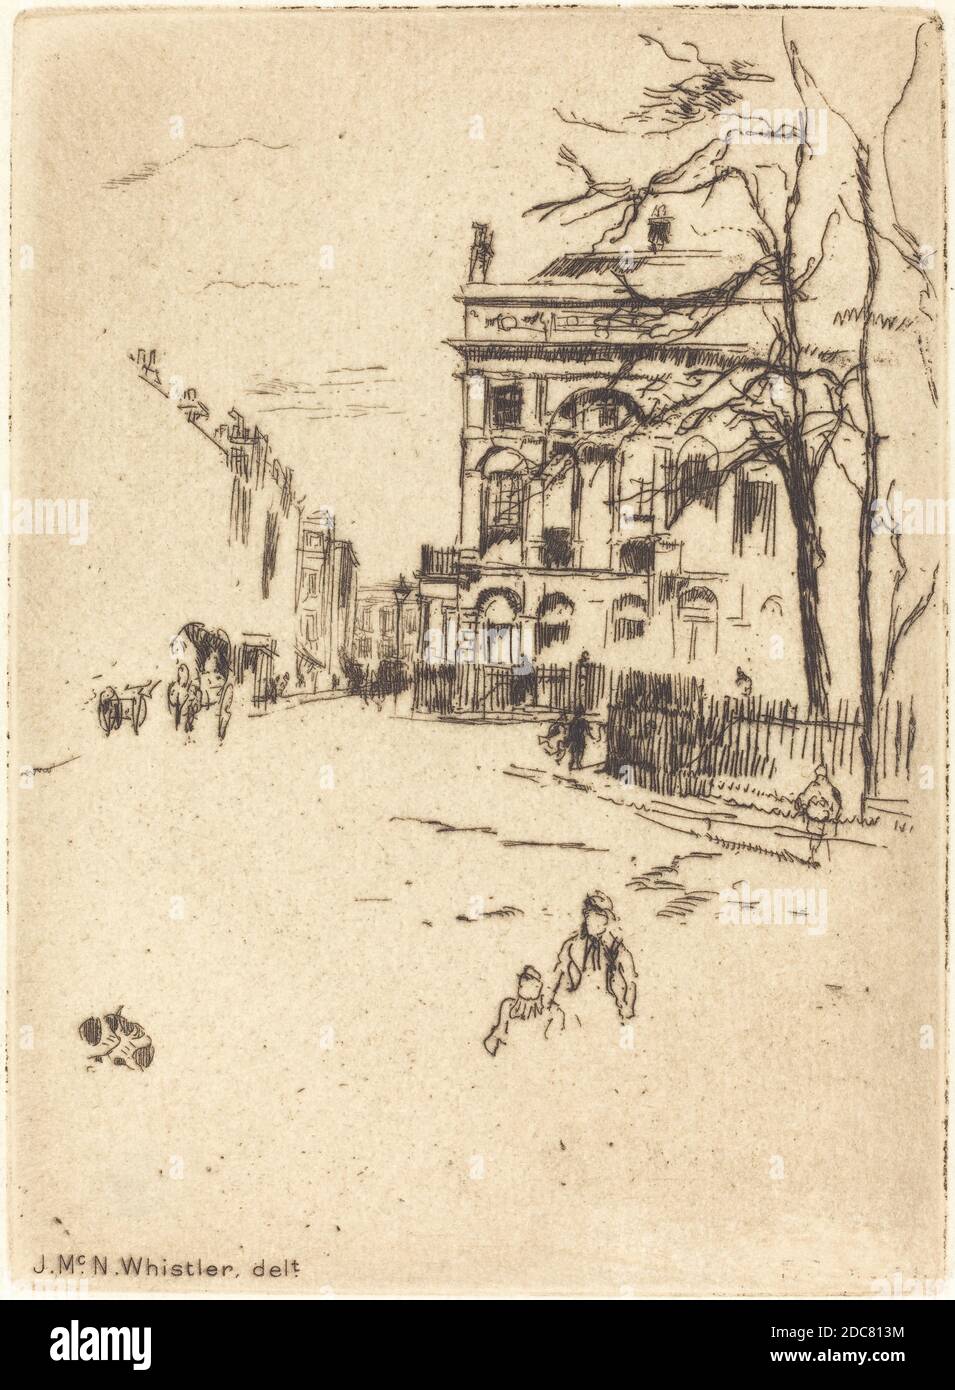 James McNeill Whistler, (artist), American, 1834 - 1903, Fitzroy Square, etching Stock Photo